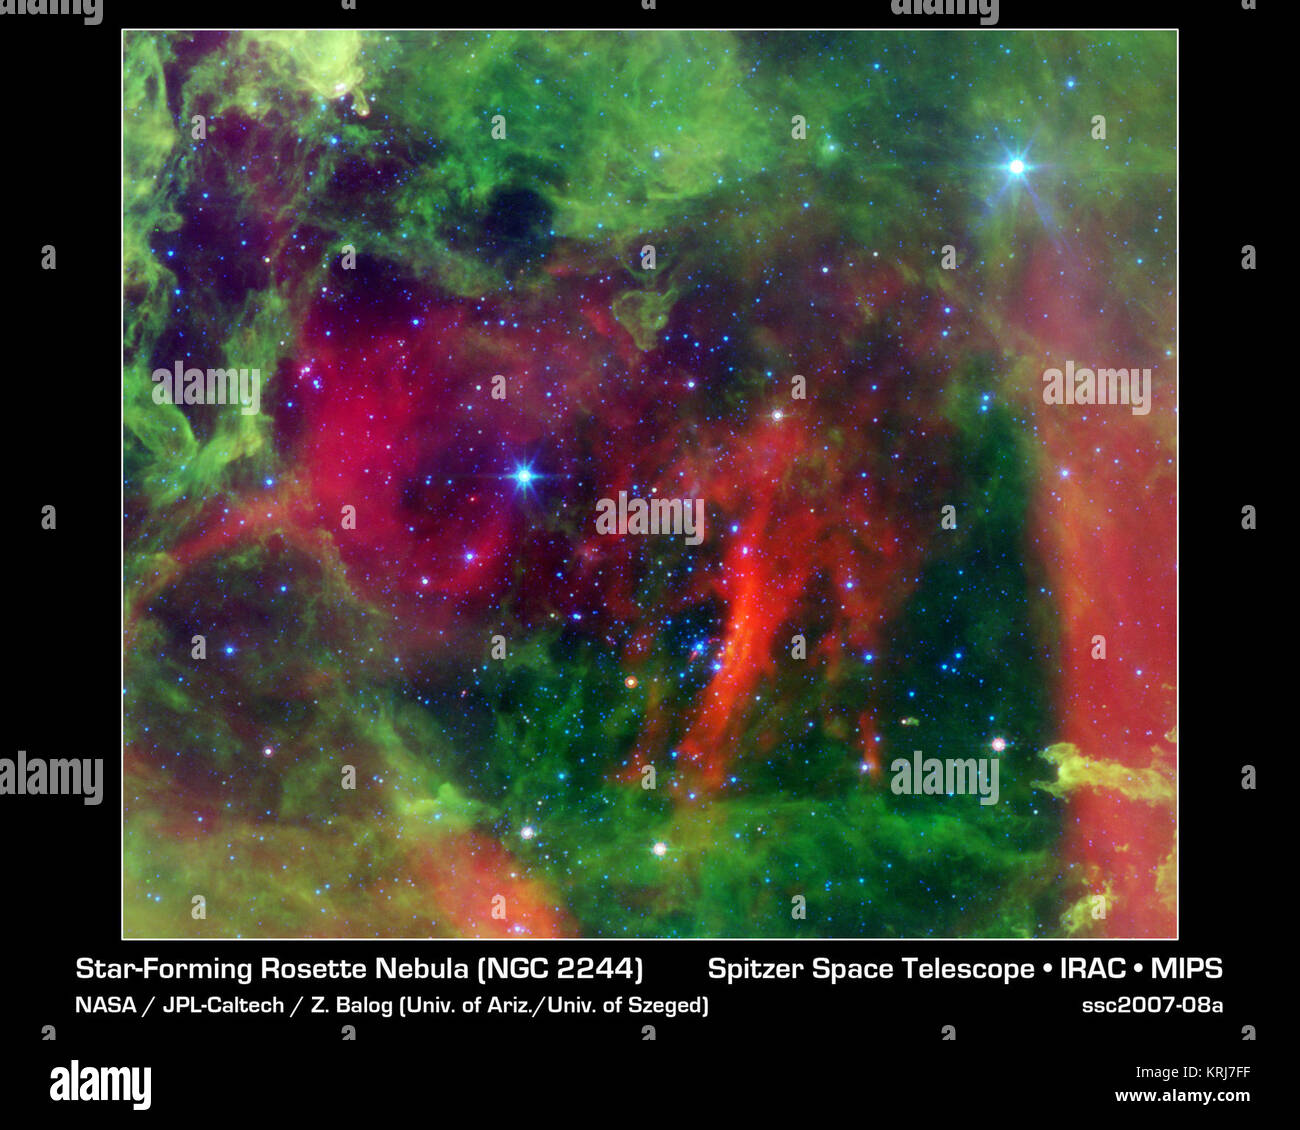 A color composite image showing the W43 starburst region in the